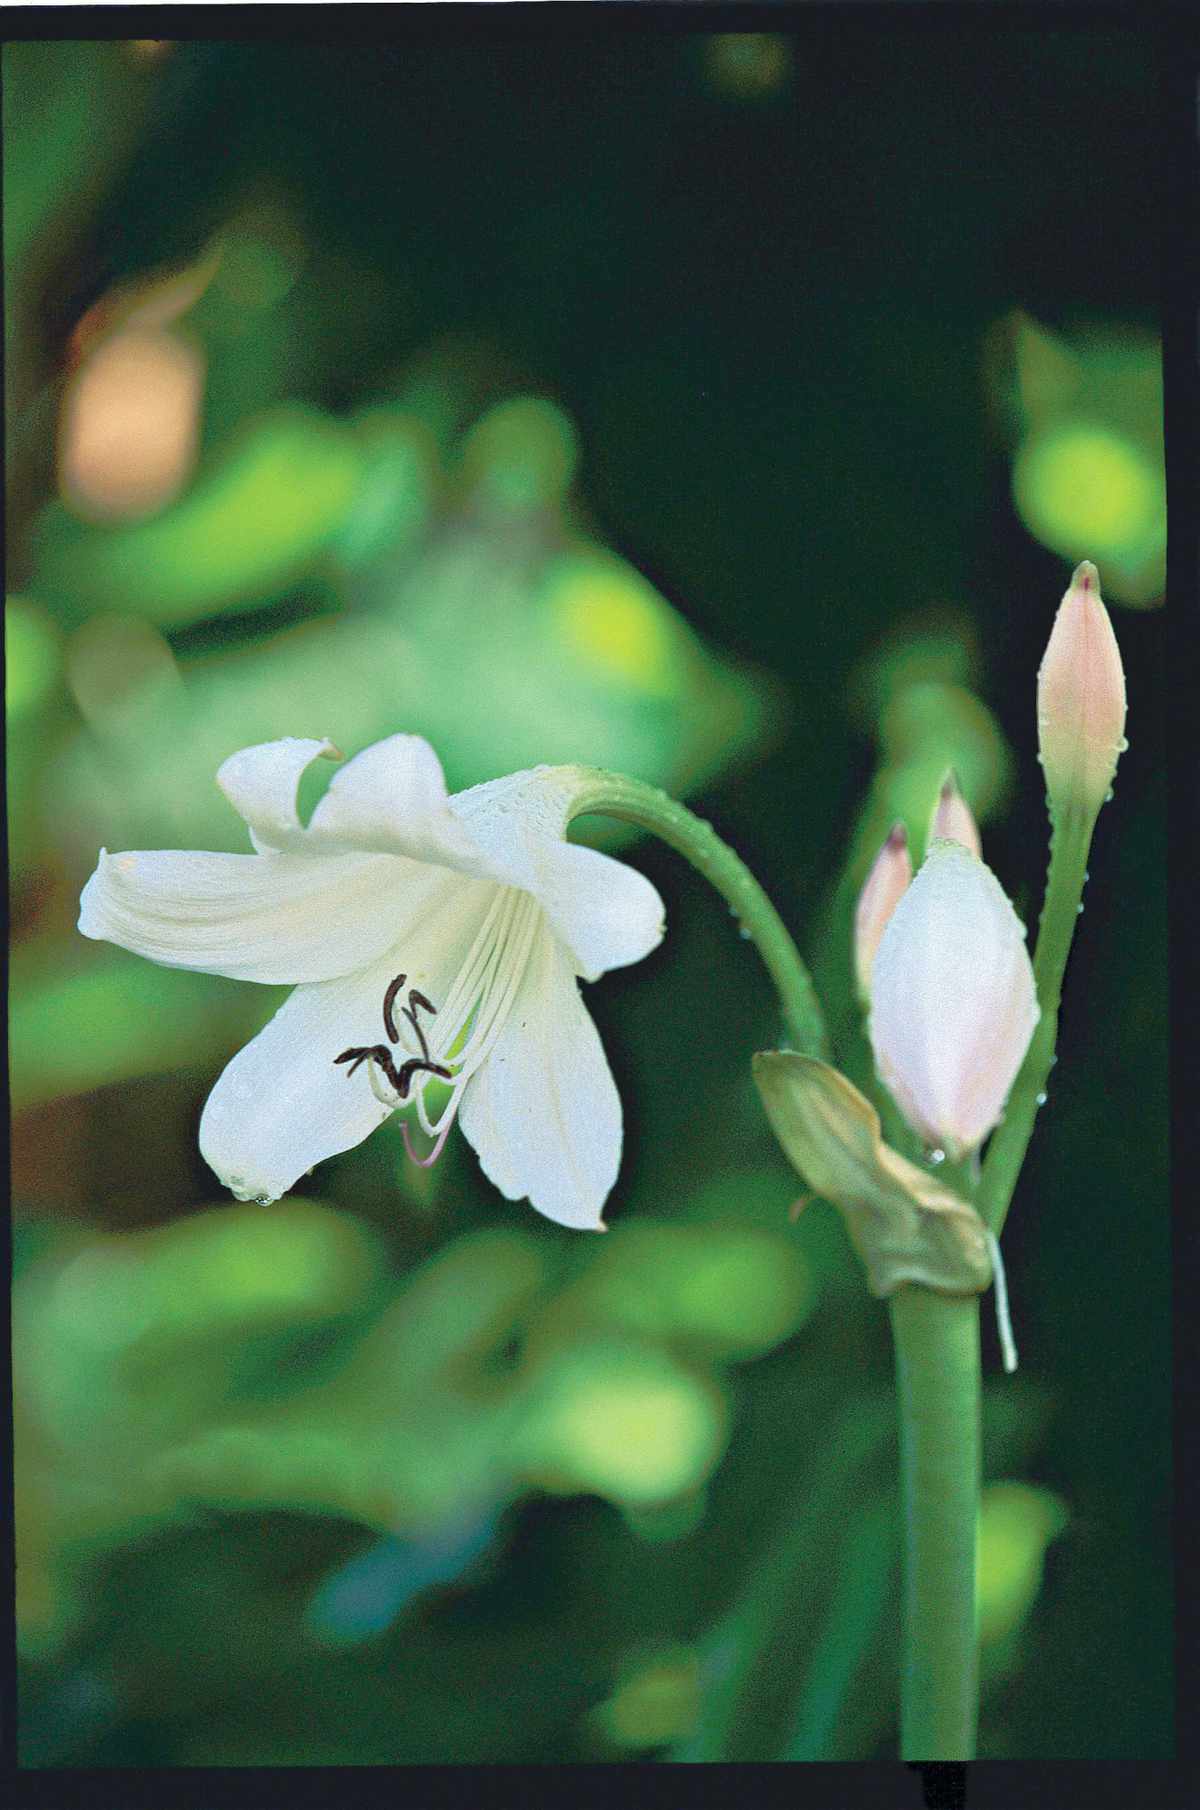 'Album' longneck crinum combines white, bell-shaped blooms with good cold-hardin